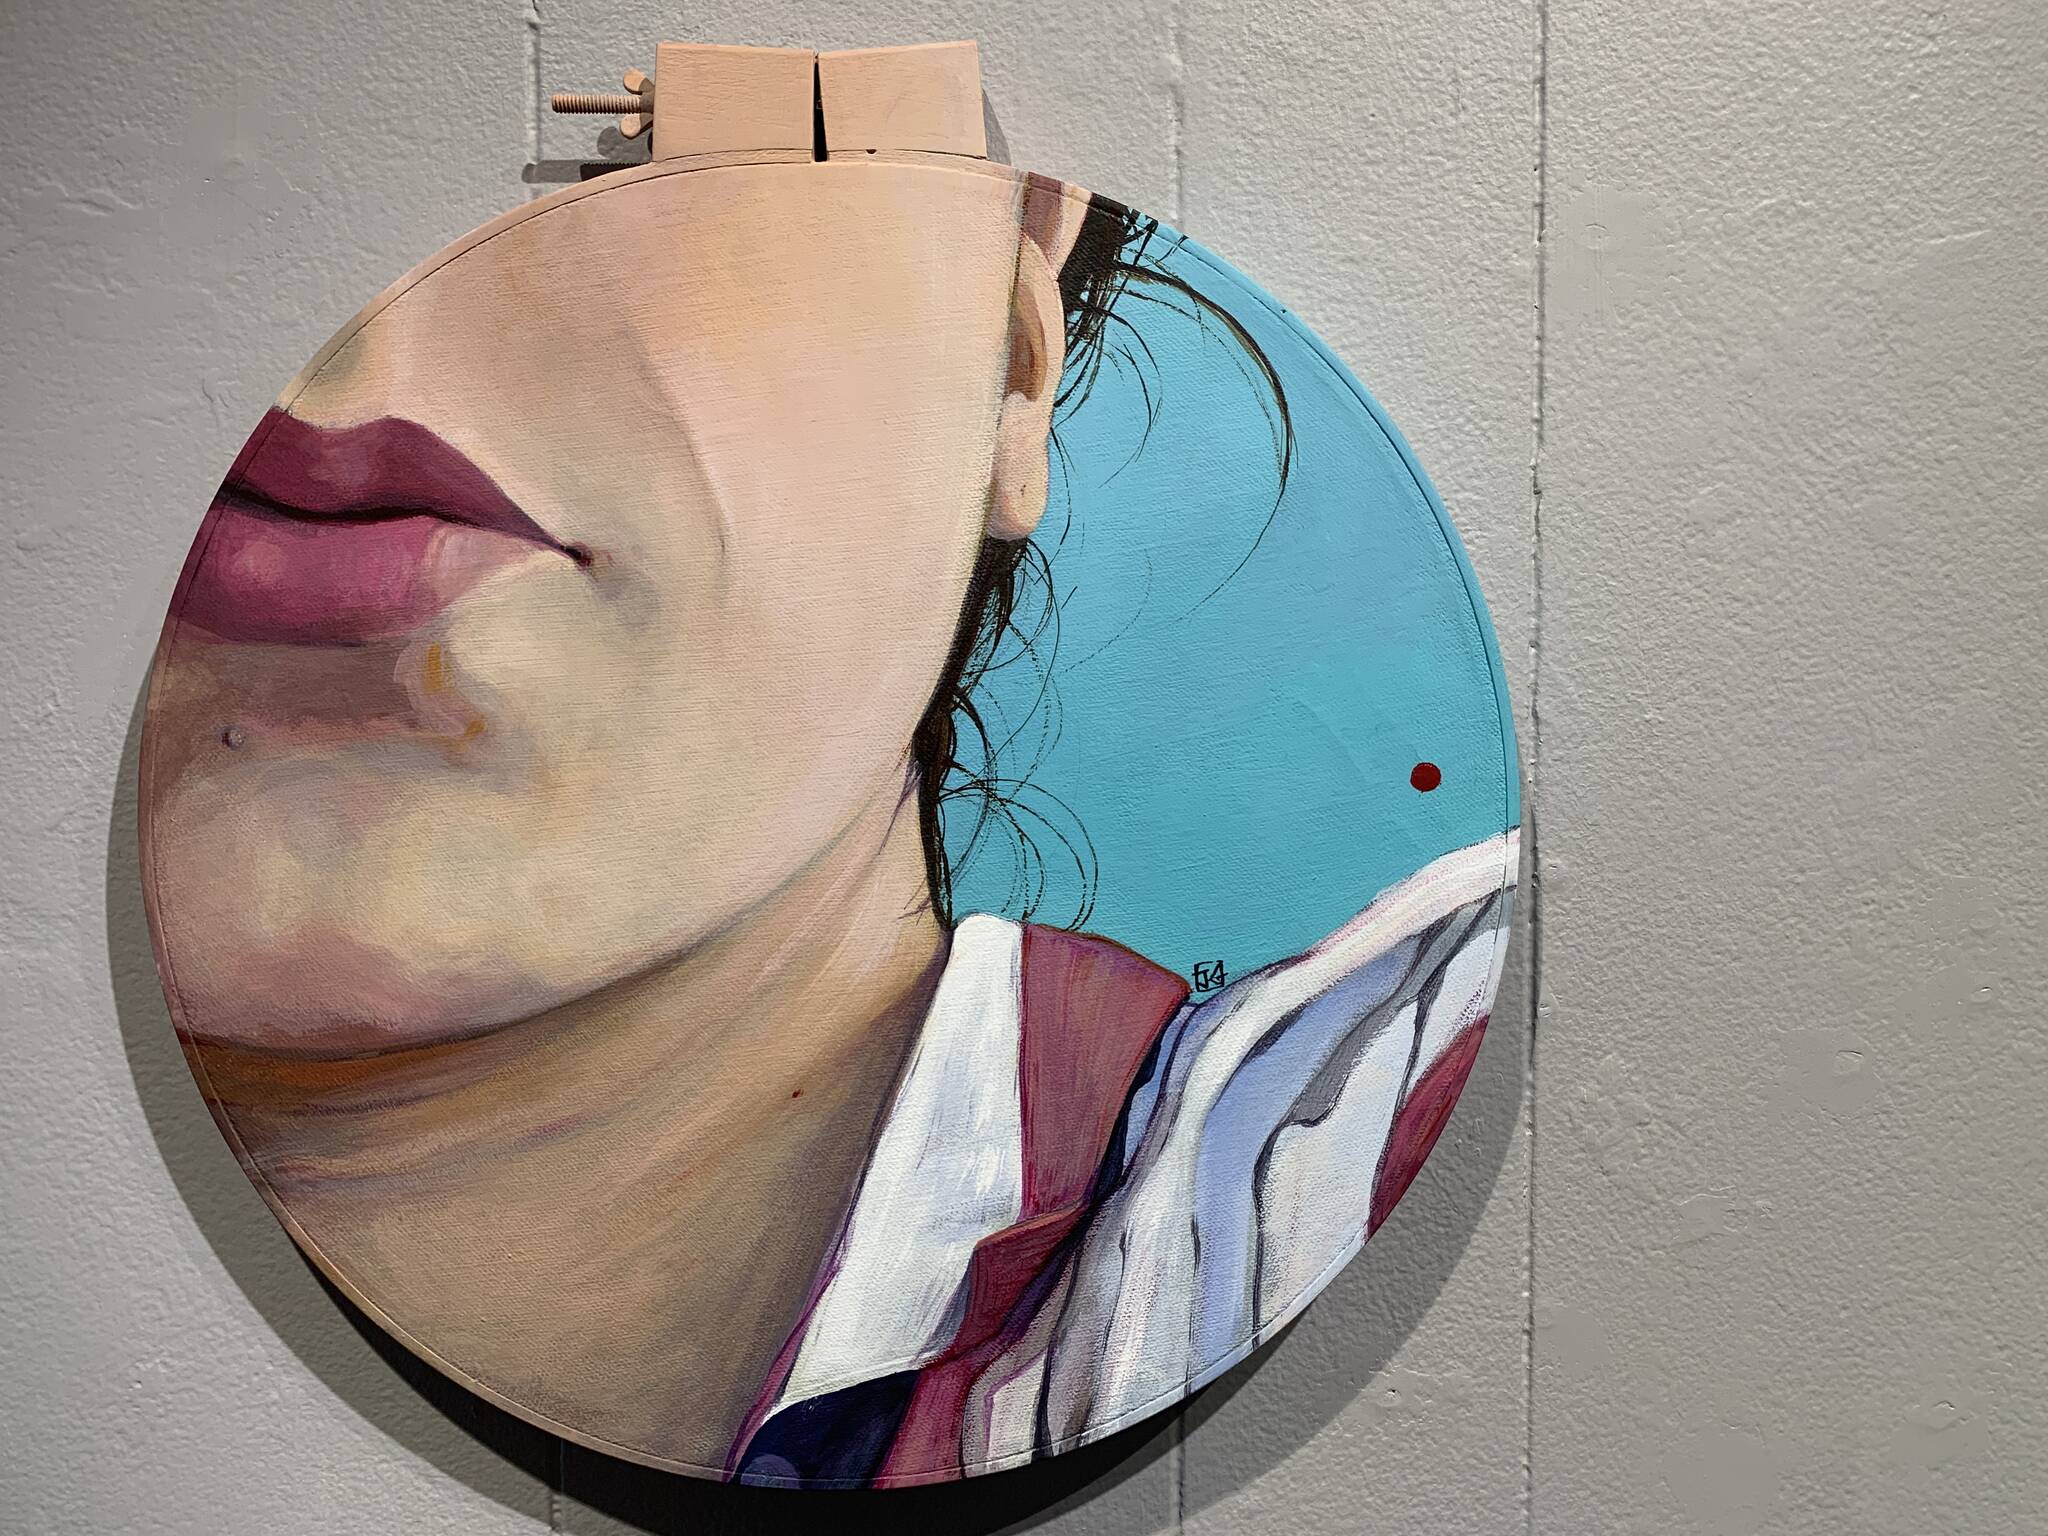 “RBF,” acrylic on canvas by Jenna Gerrety, is on display March 16 at Homer Council on the Arts through March as part of the “Bodily Autonomy” exhibit co-sponsored by Kachemak Bay Family Planning Clinic. (Photo by Christina Whiting/Homer News)